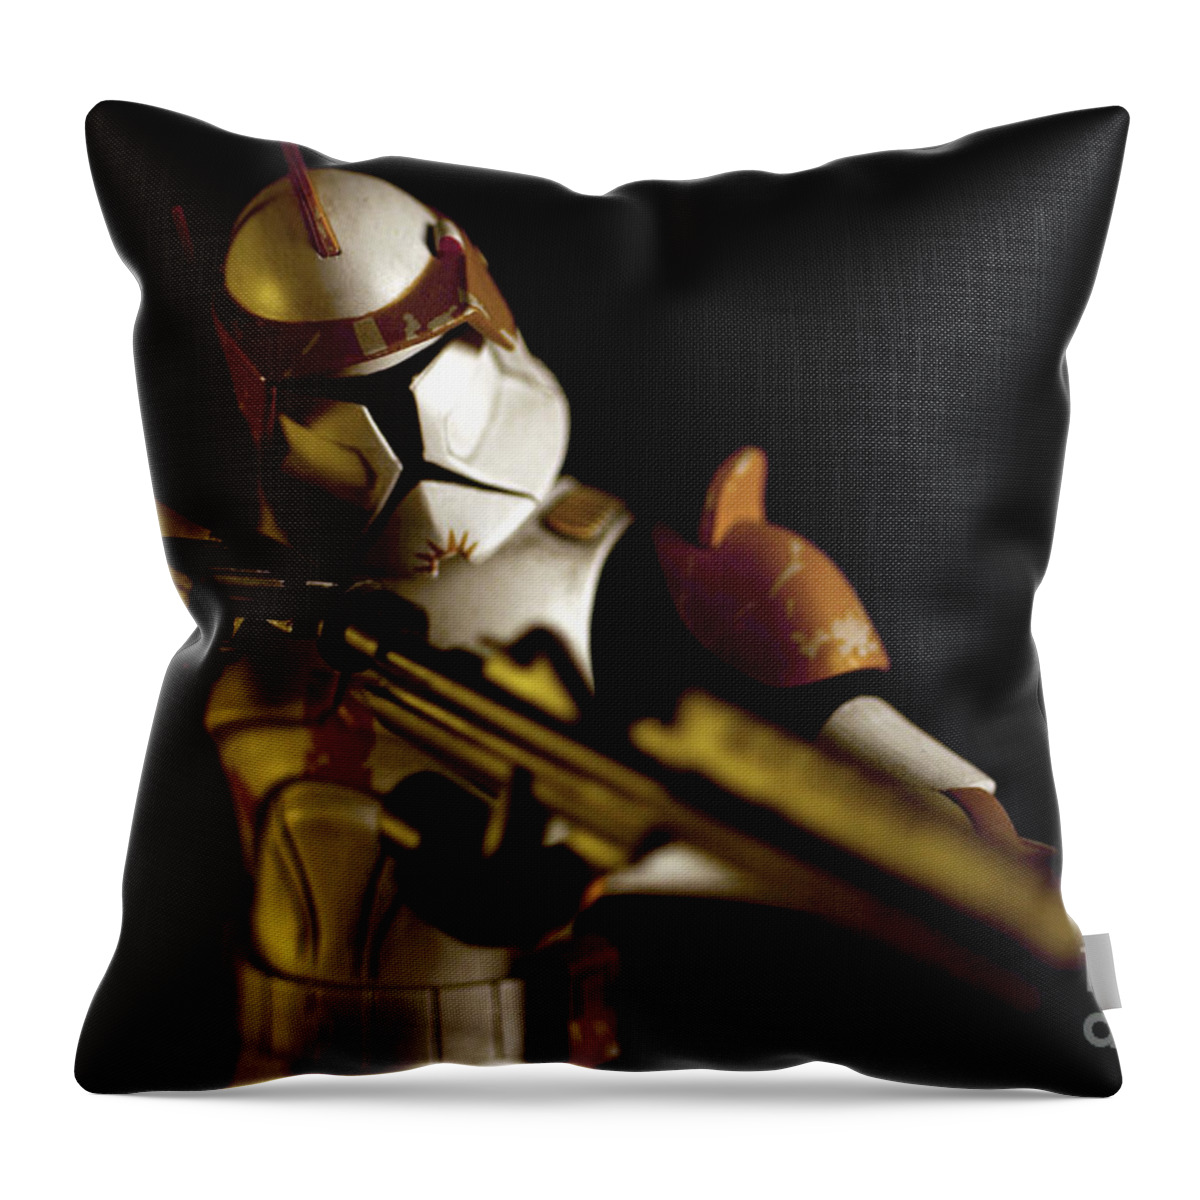 Star Wars Throw Pillow featuring the photograph Clone Trooper 2 by Micah May